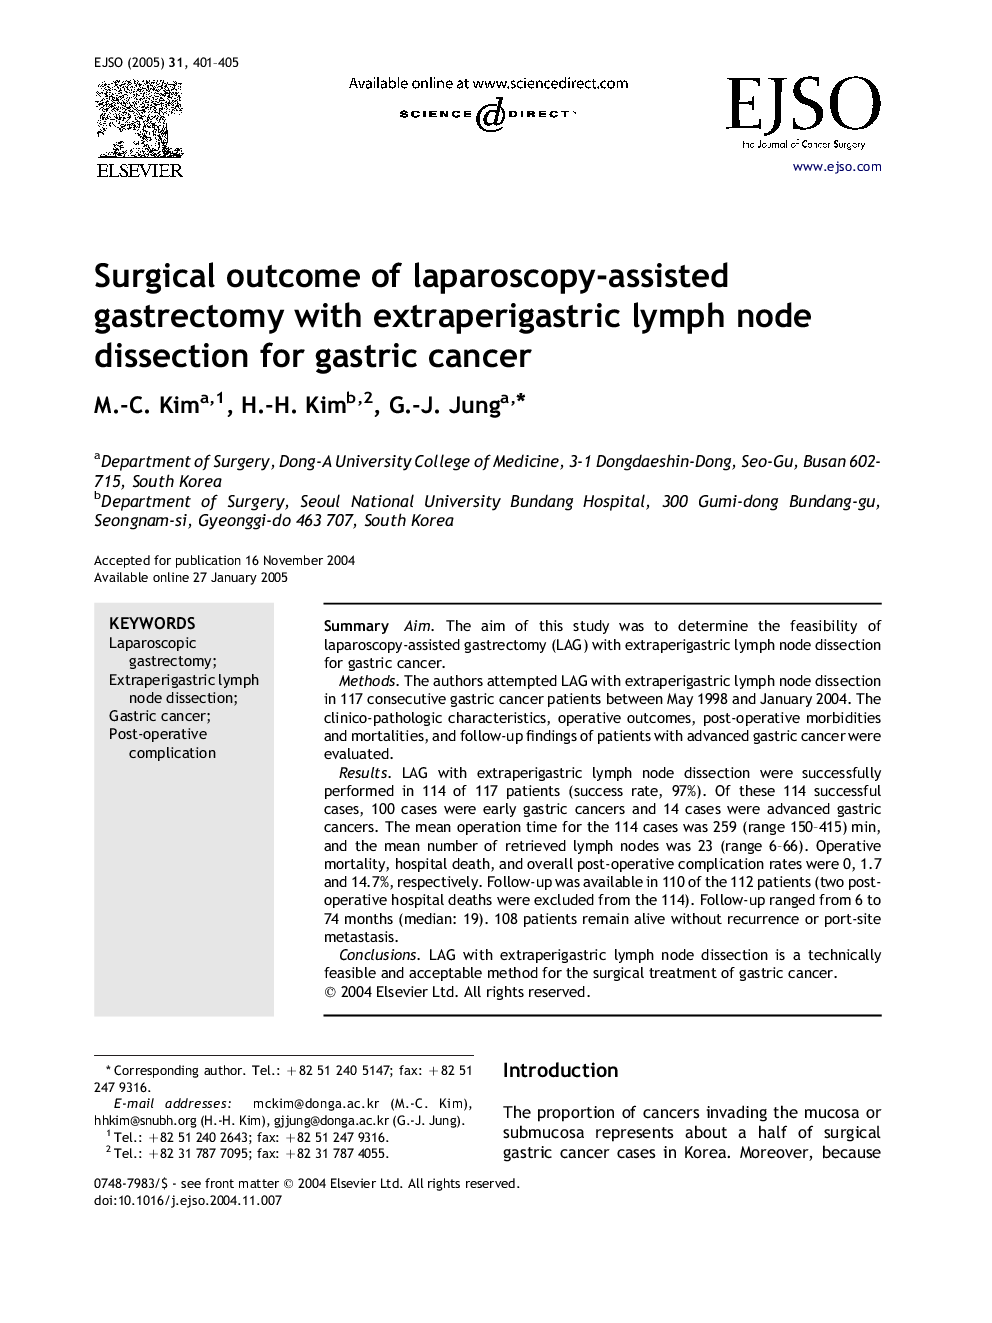 Surgical outcome of laparoscopy-assisted gastrectomy with extraperigastric lymph node dissection for gastric cancer